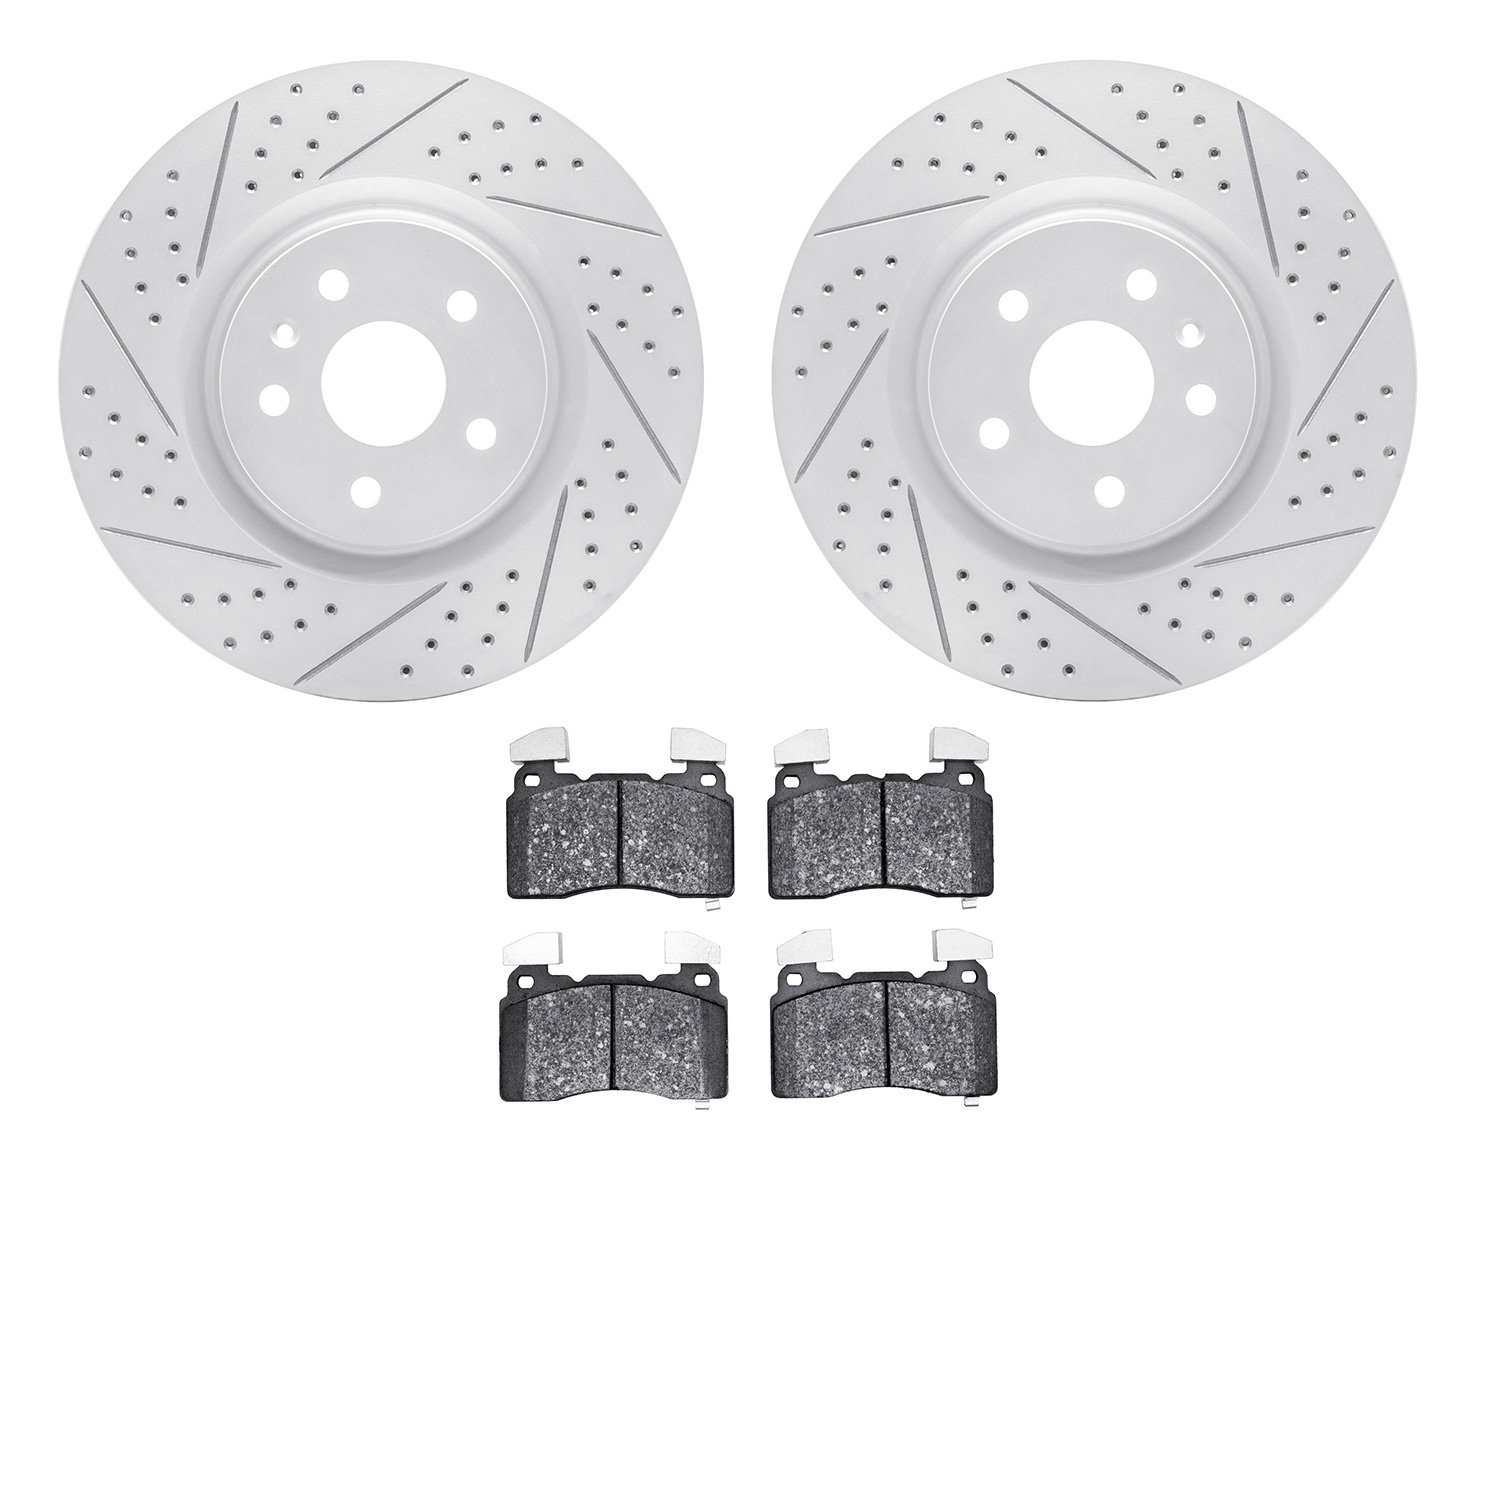 2502-45025 Geoperformance Drilled/Slotted Rotors w/5000 Advanced Brake Pads Kit, 2014-2017 GM, Position: Front